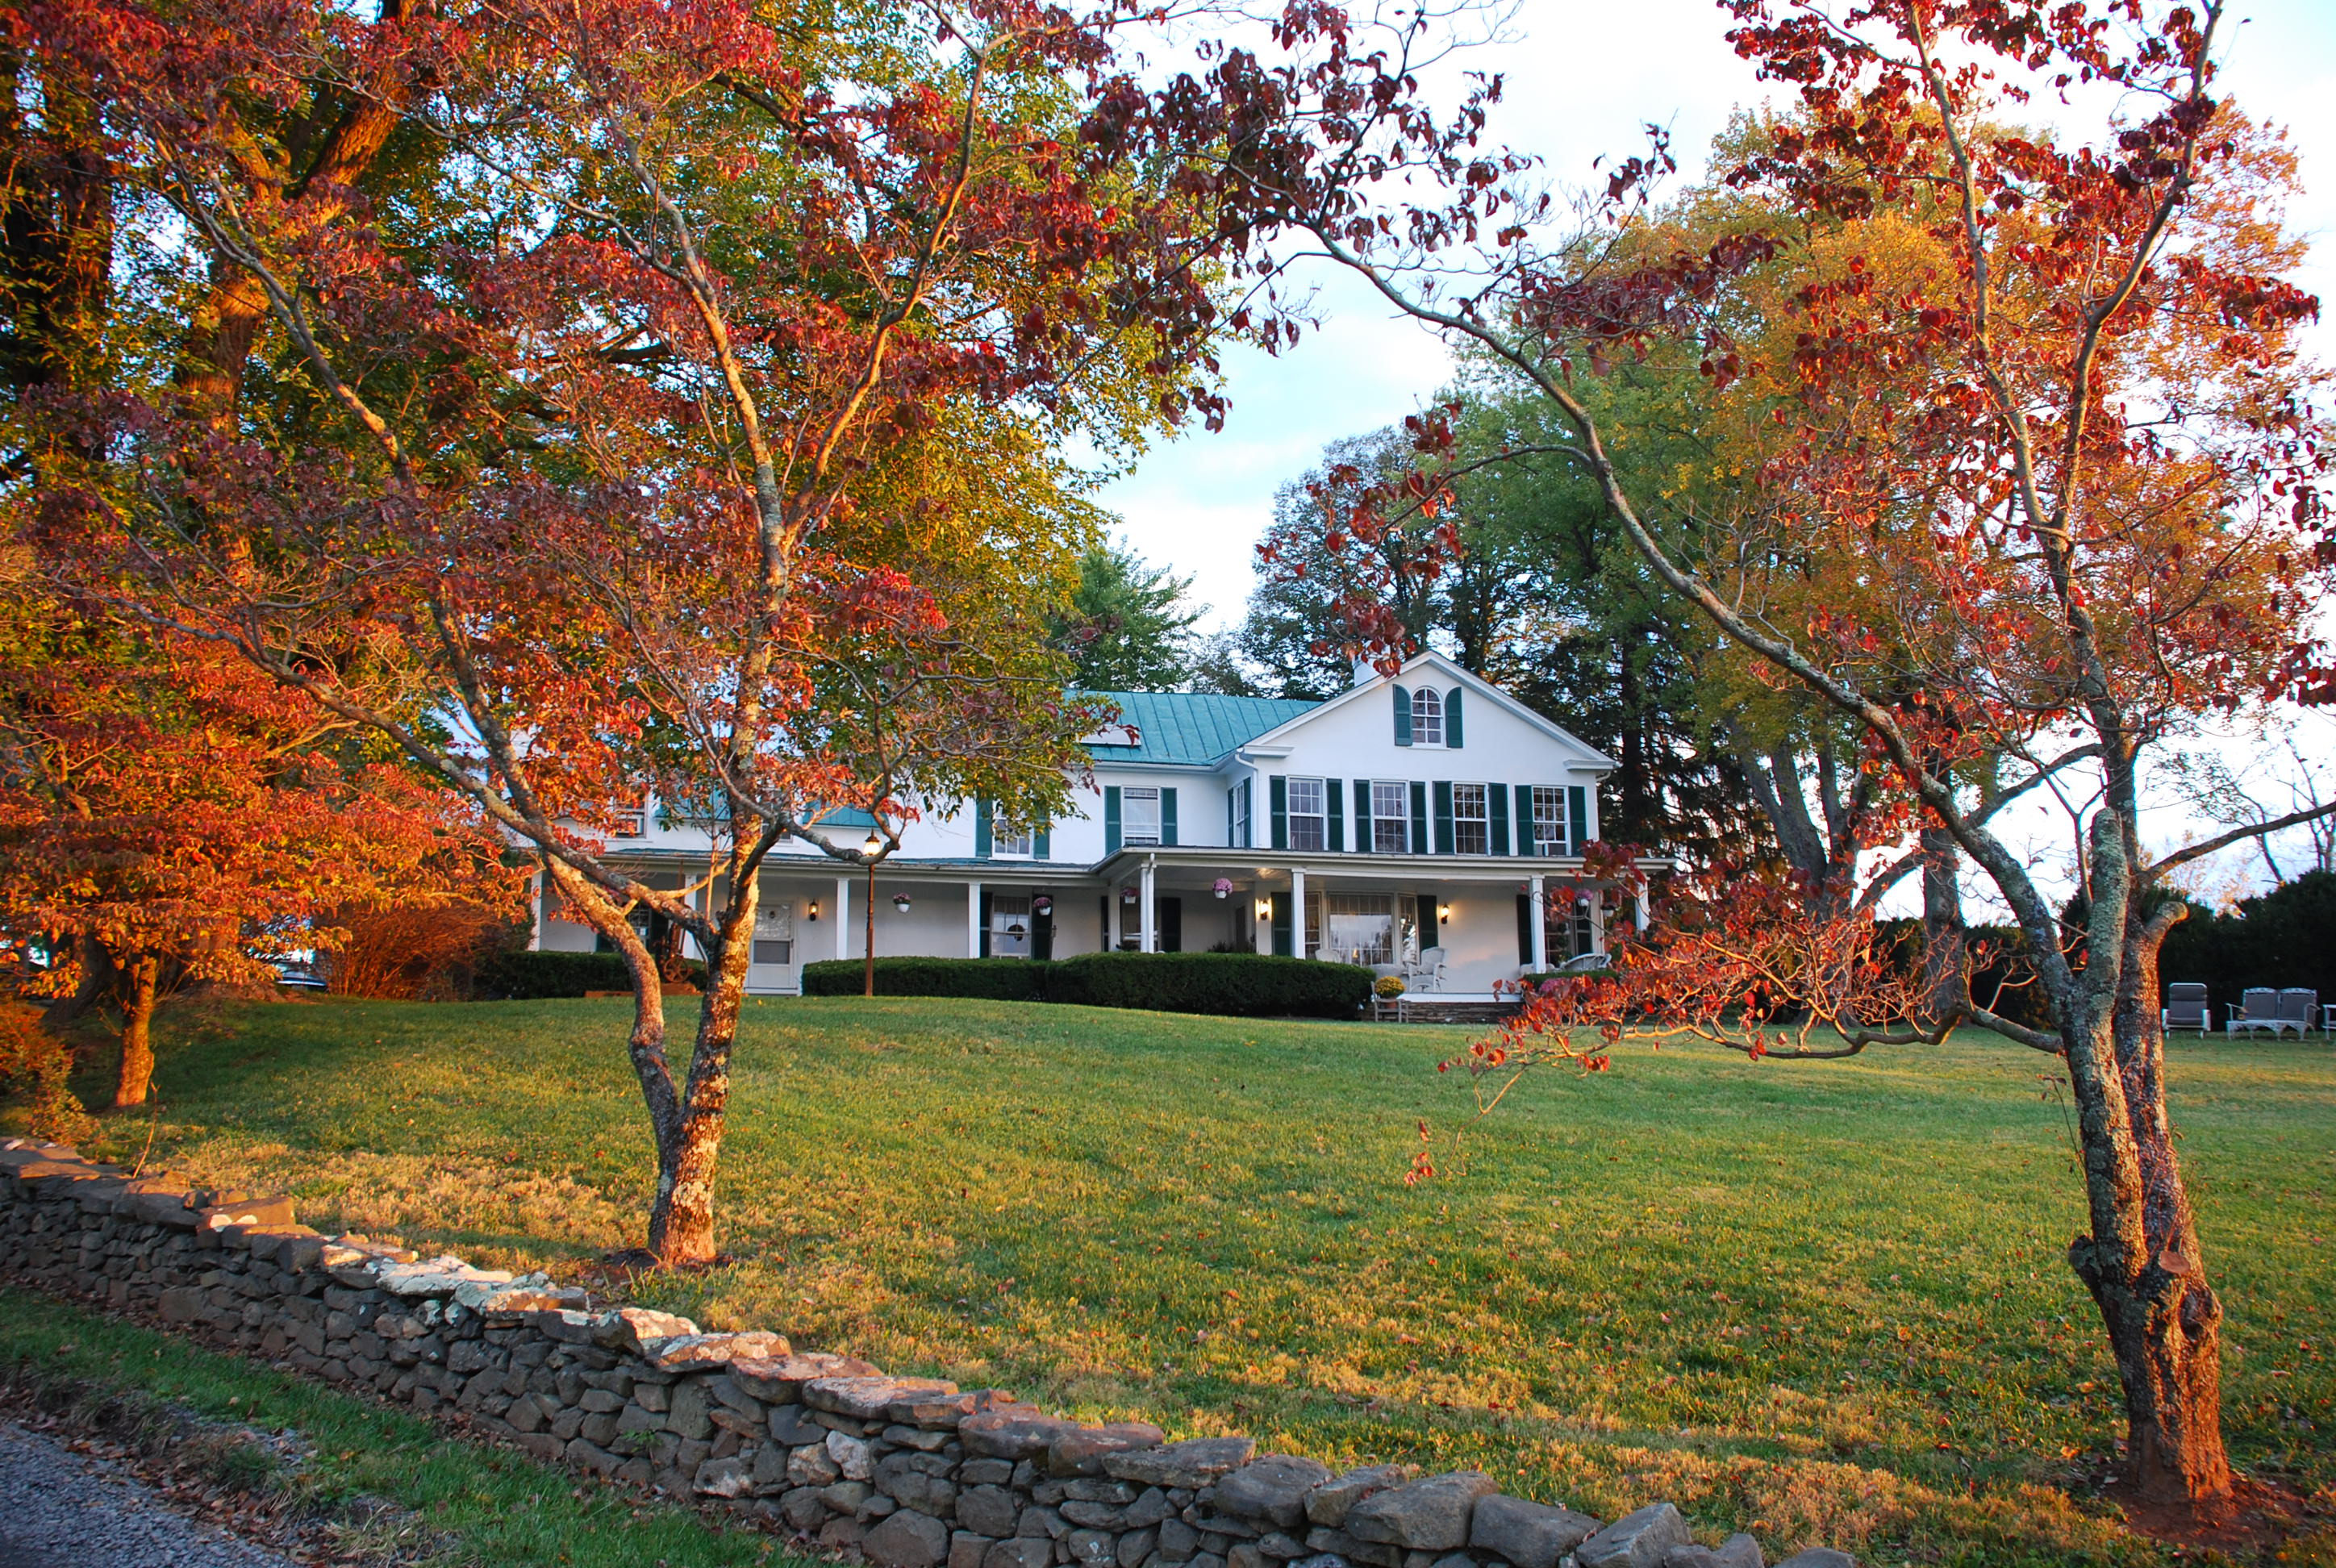 Briar Patch Bed and Breakfast, Middleburg, VA